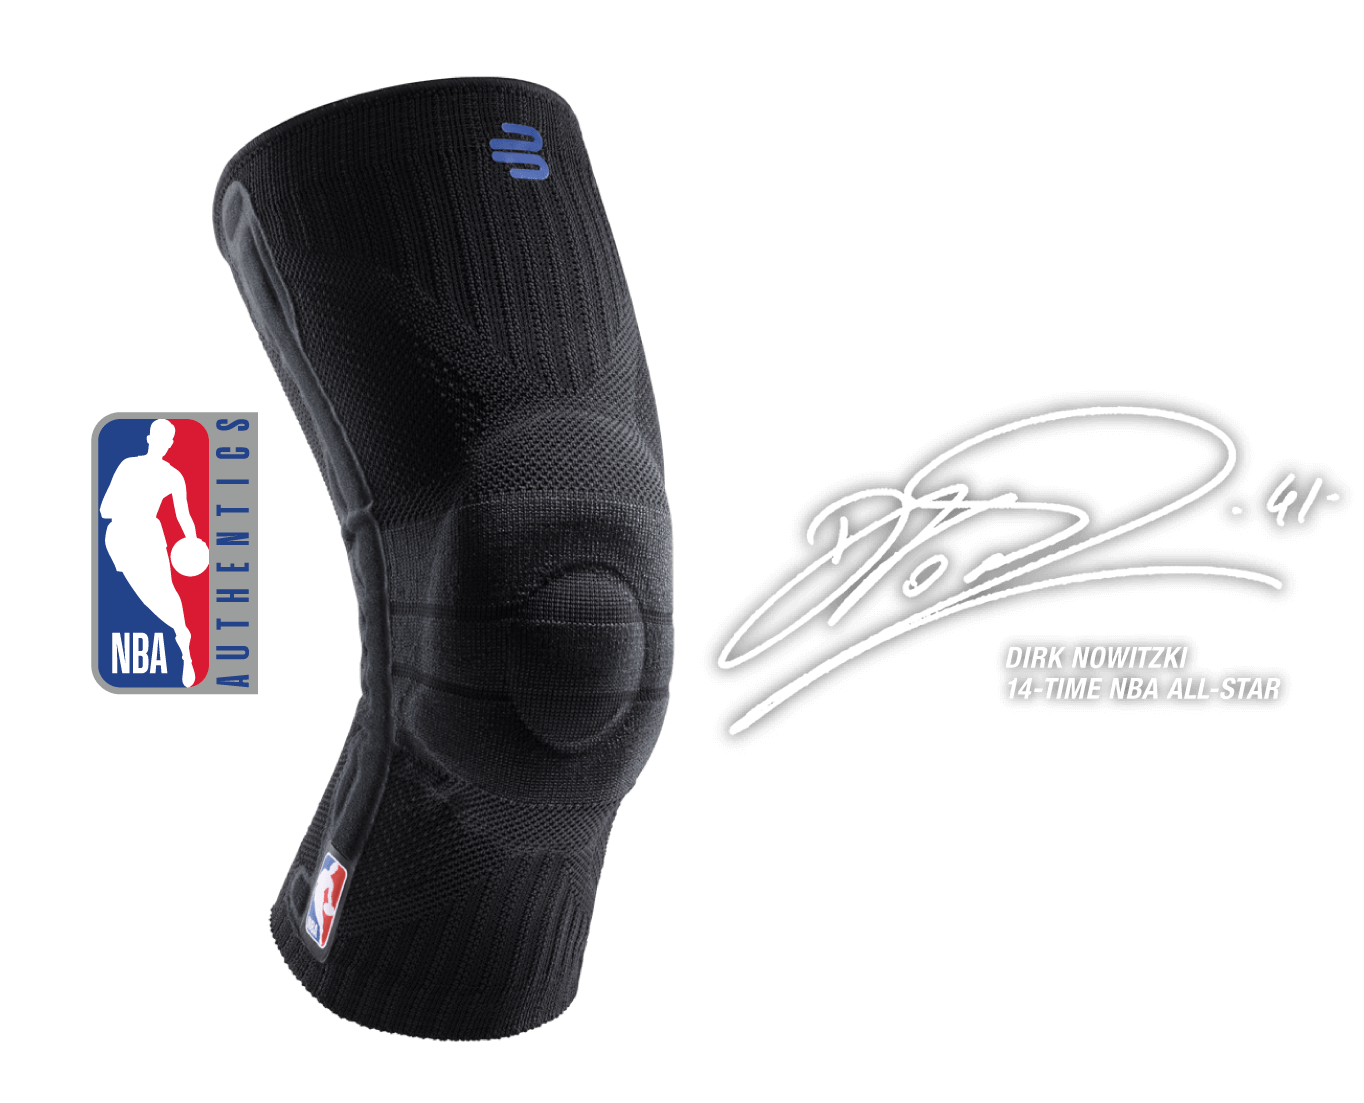 Bauerfeind Sports Knee Support NBA - Officially Licensed